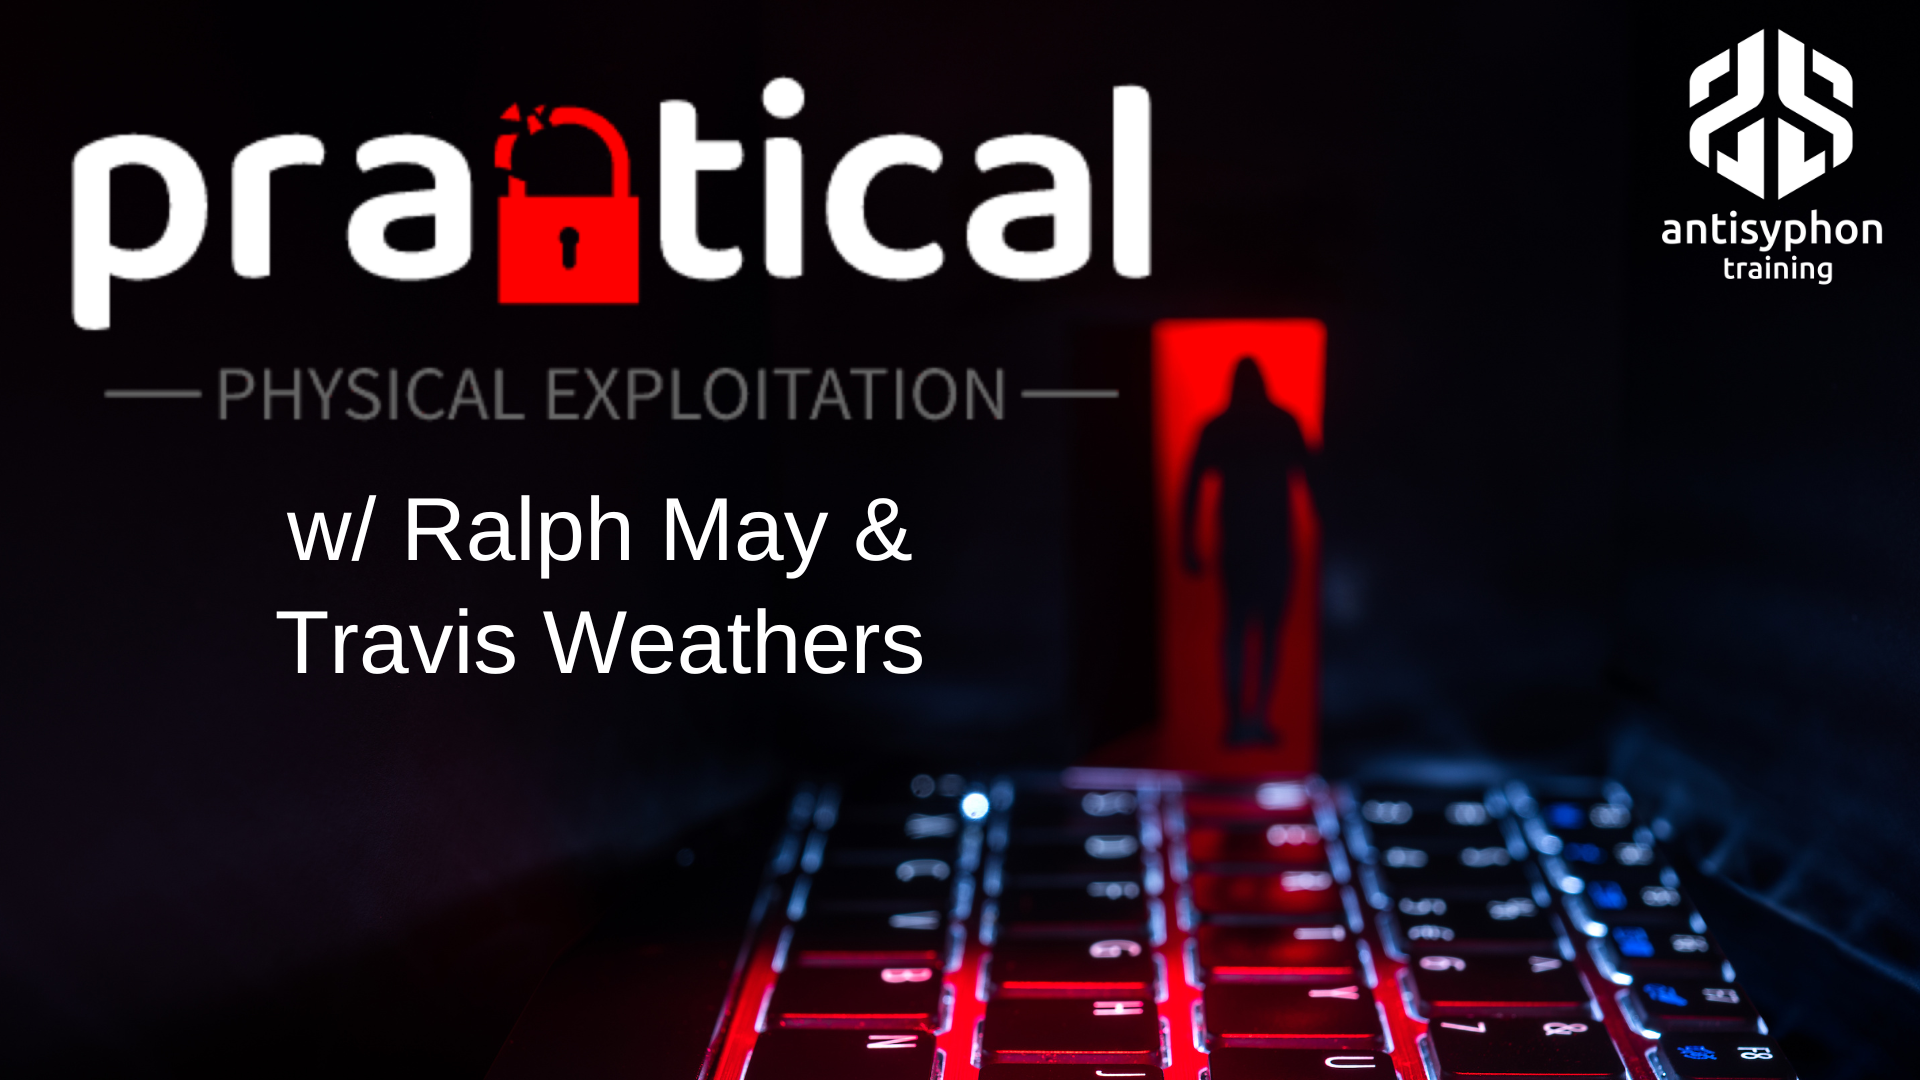 Practical Physical Exploitation w/ Ralph May and Travis Weathers